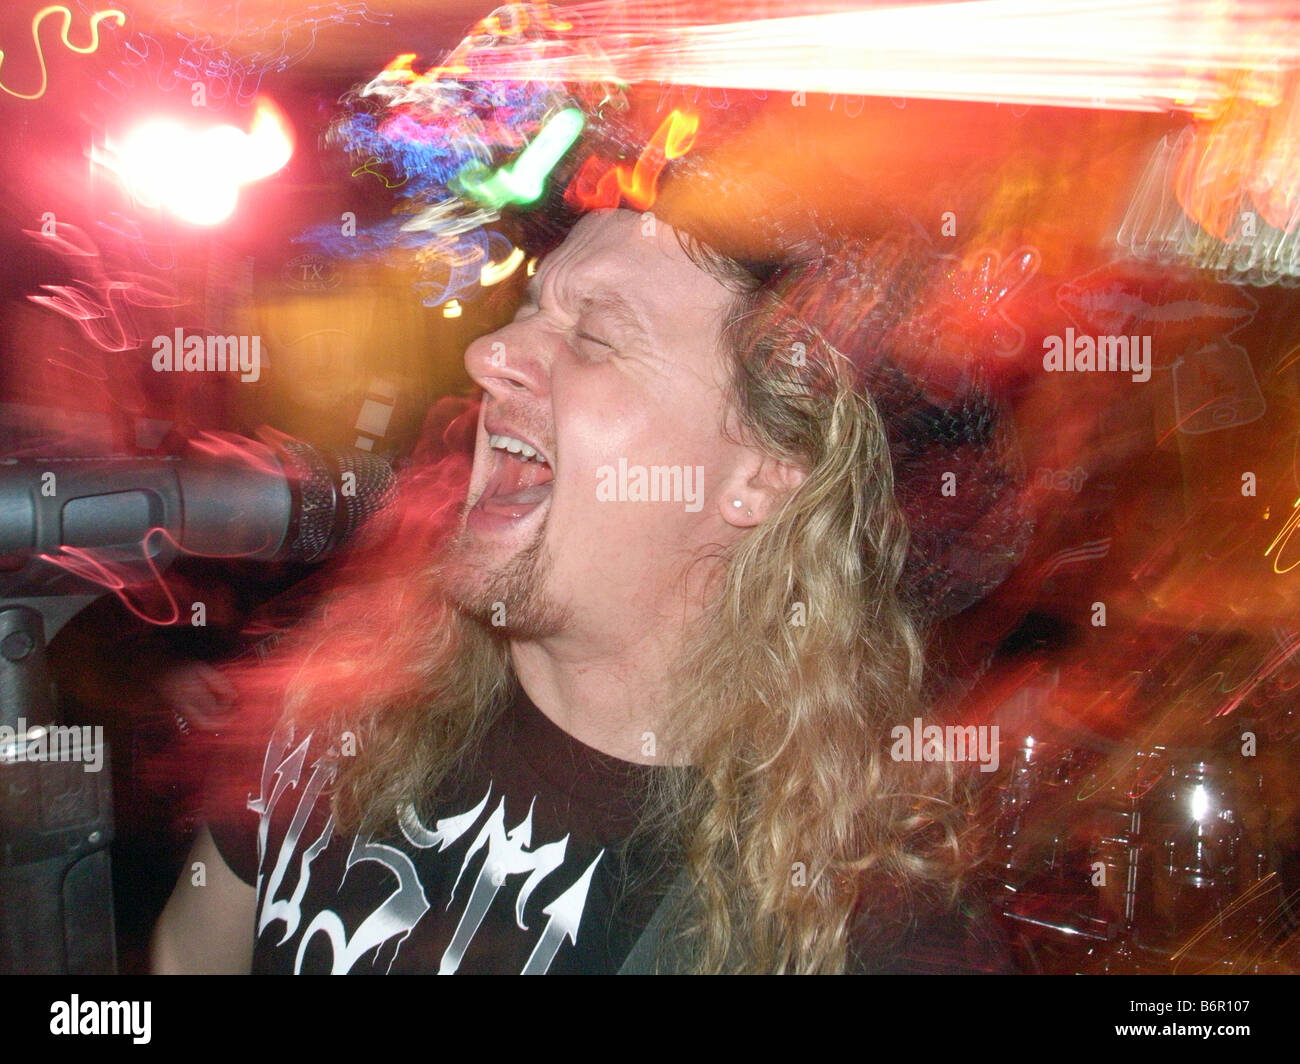 Kevin Lawless of the locally famous Bar band 'Liplock' sings during a show in West Haven Connecticut USA Stock Photo